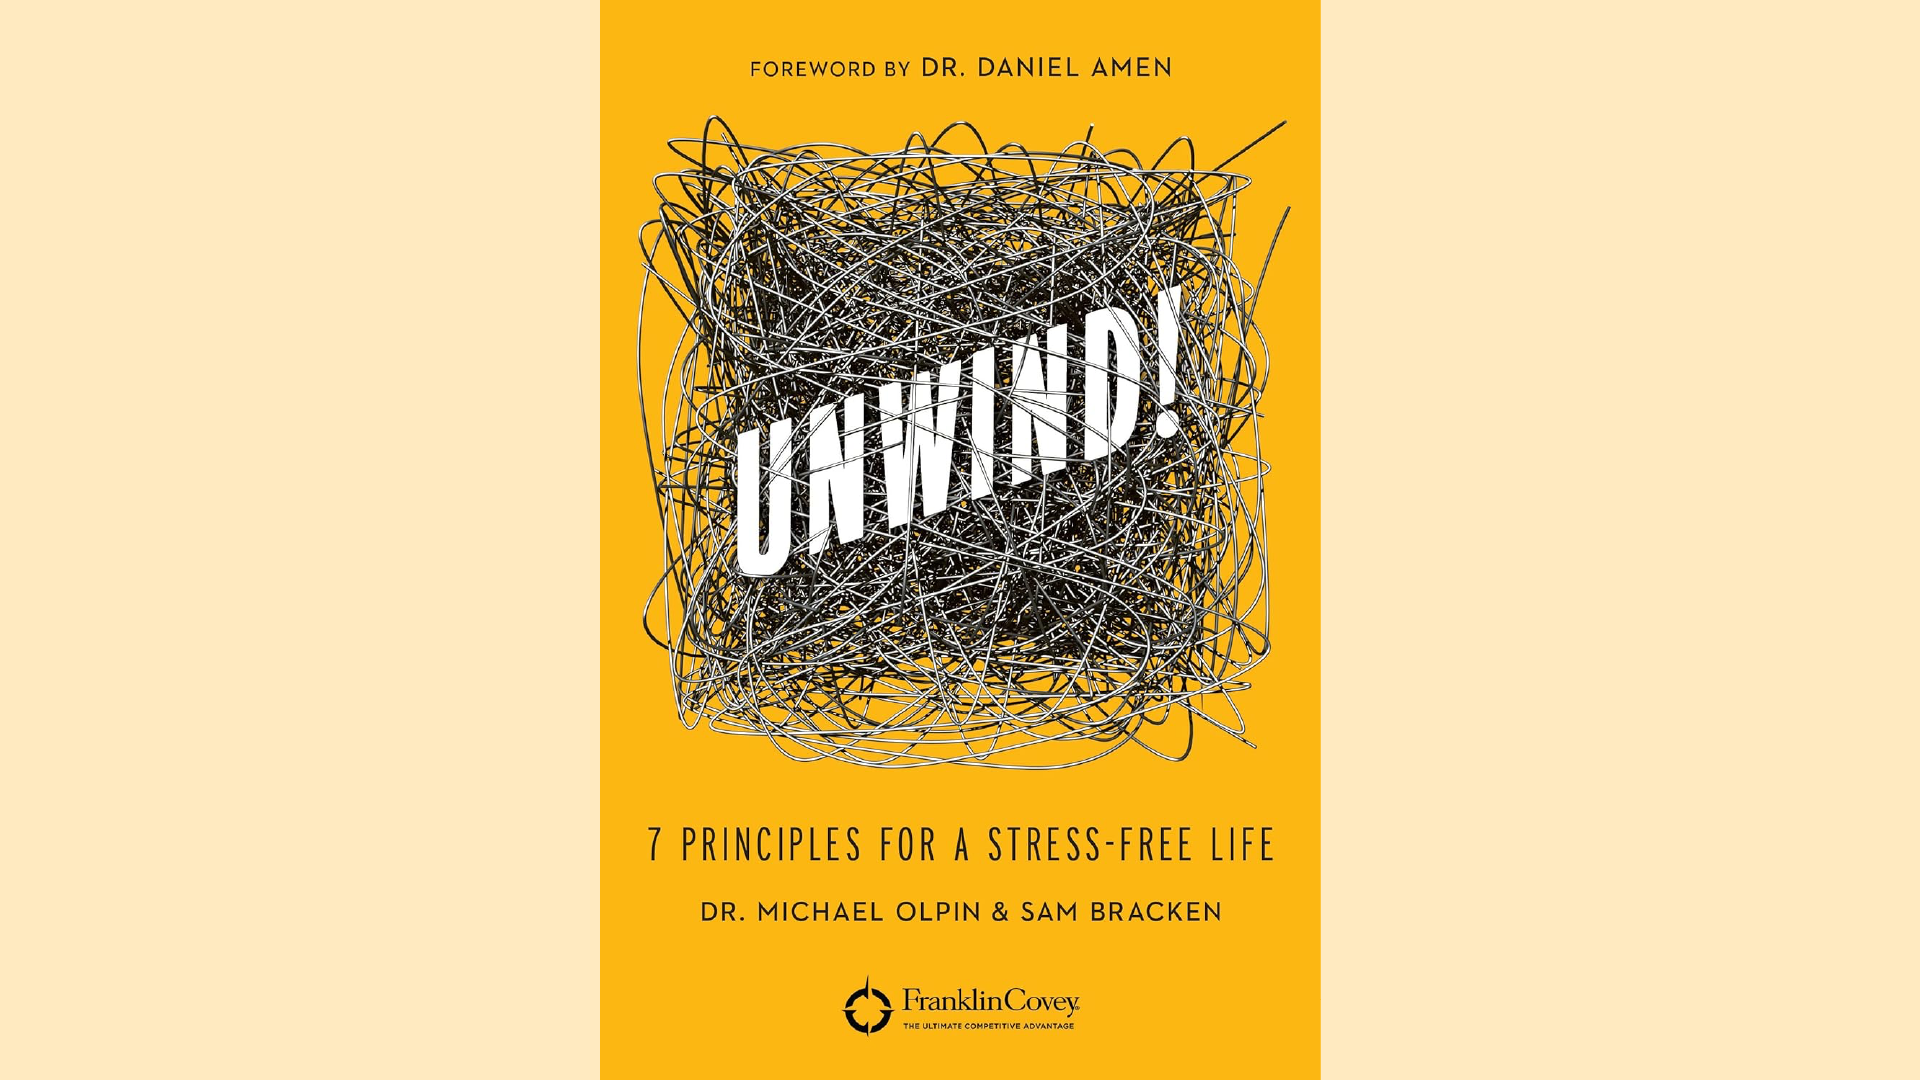 Summary: Unwind!: 7 Principles for a Stress-Free Life by Michael Olpin and Sam Bracken